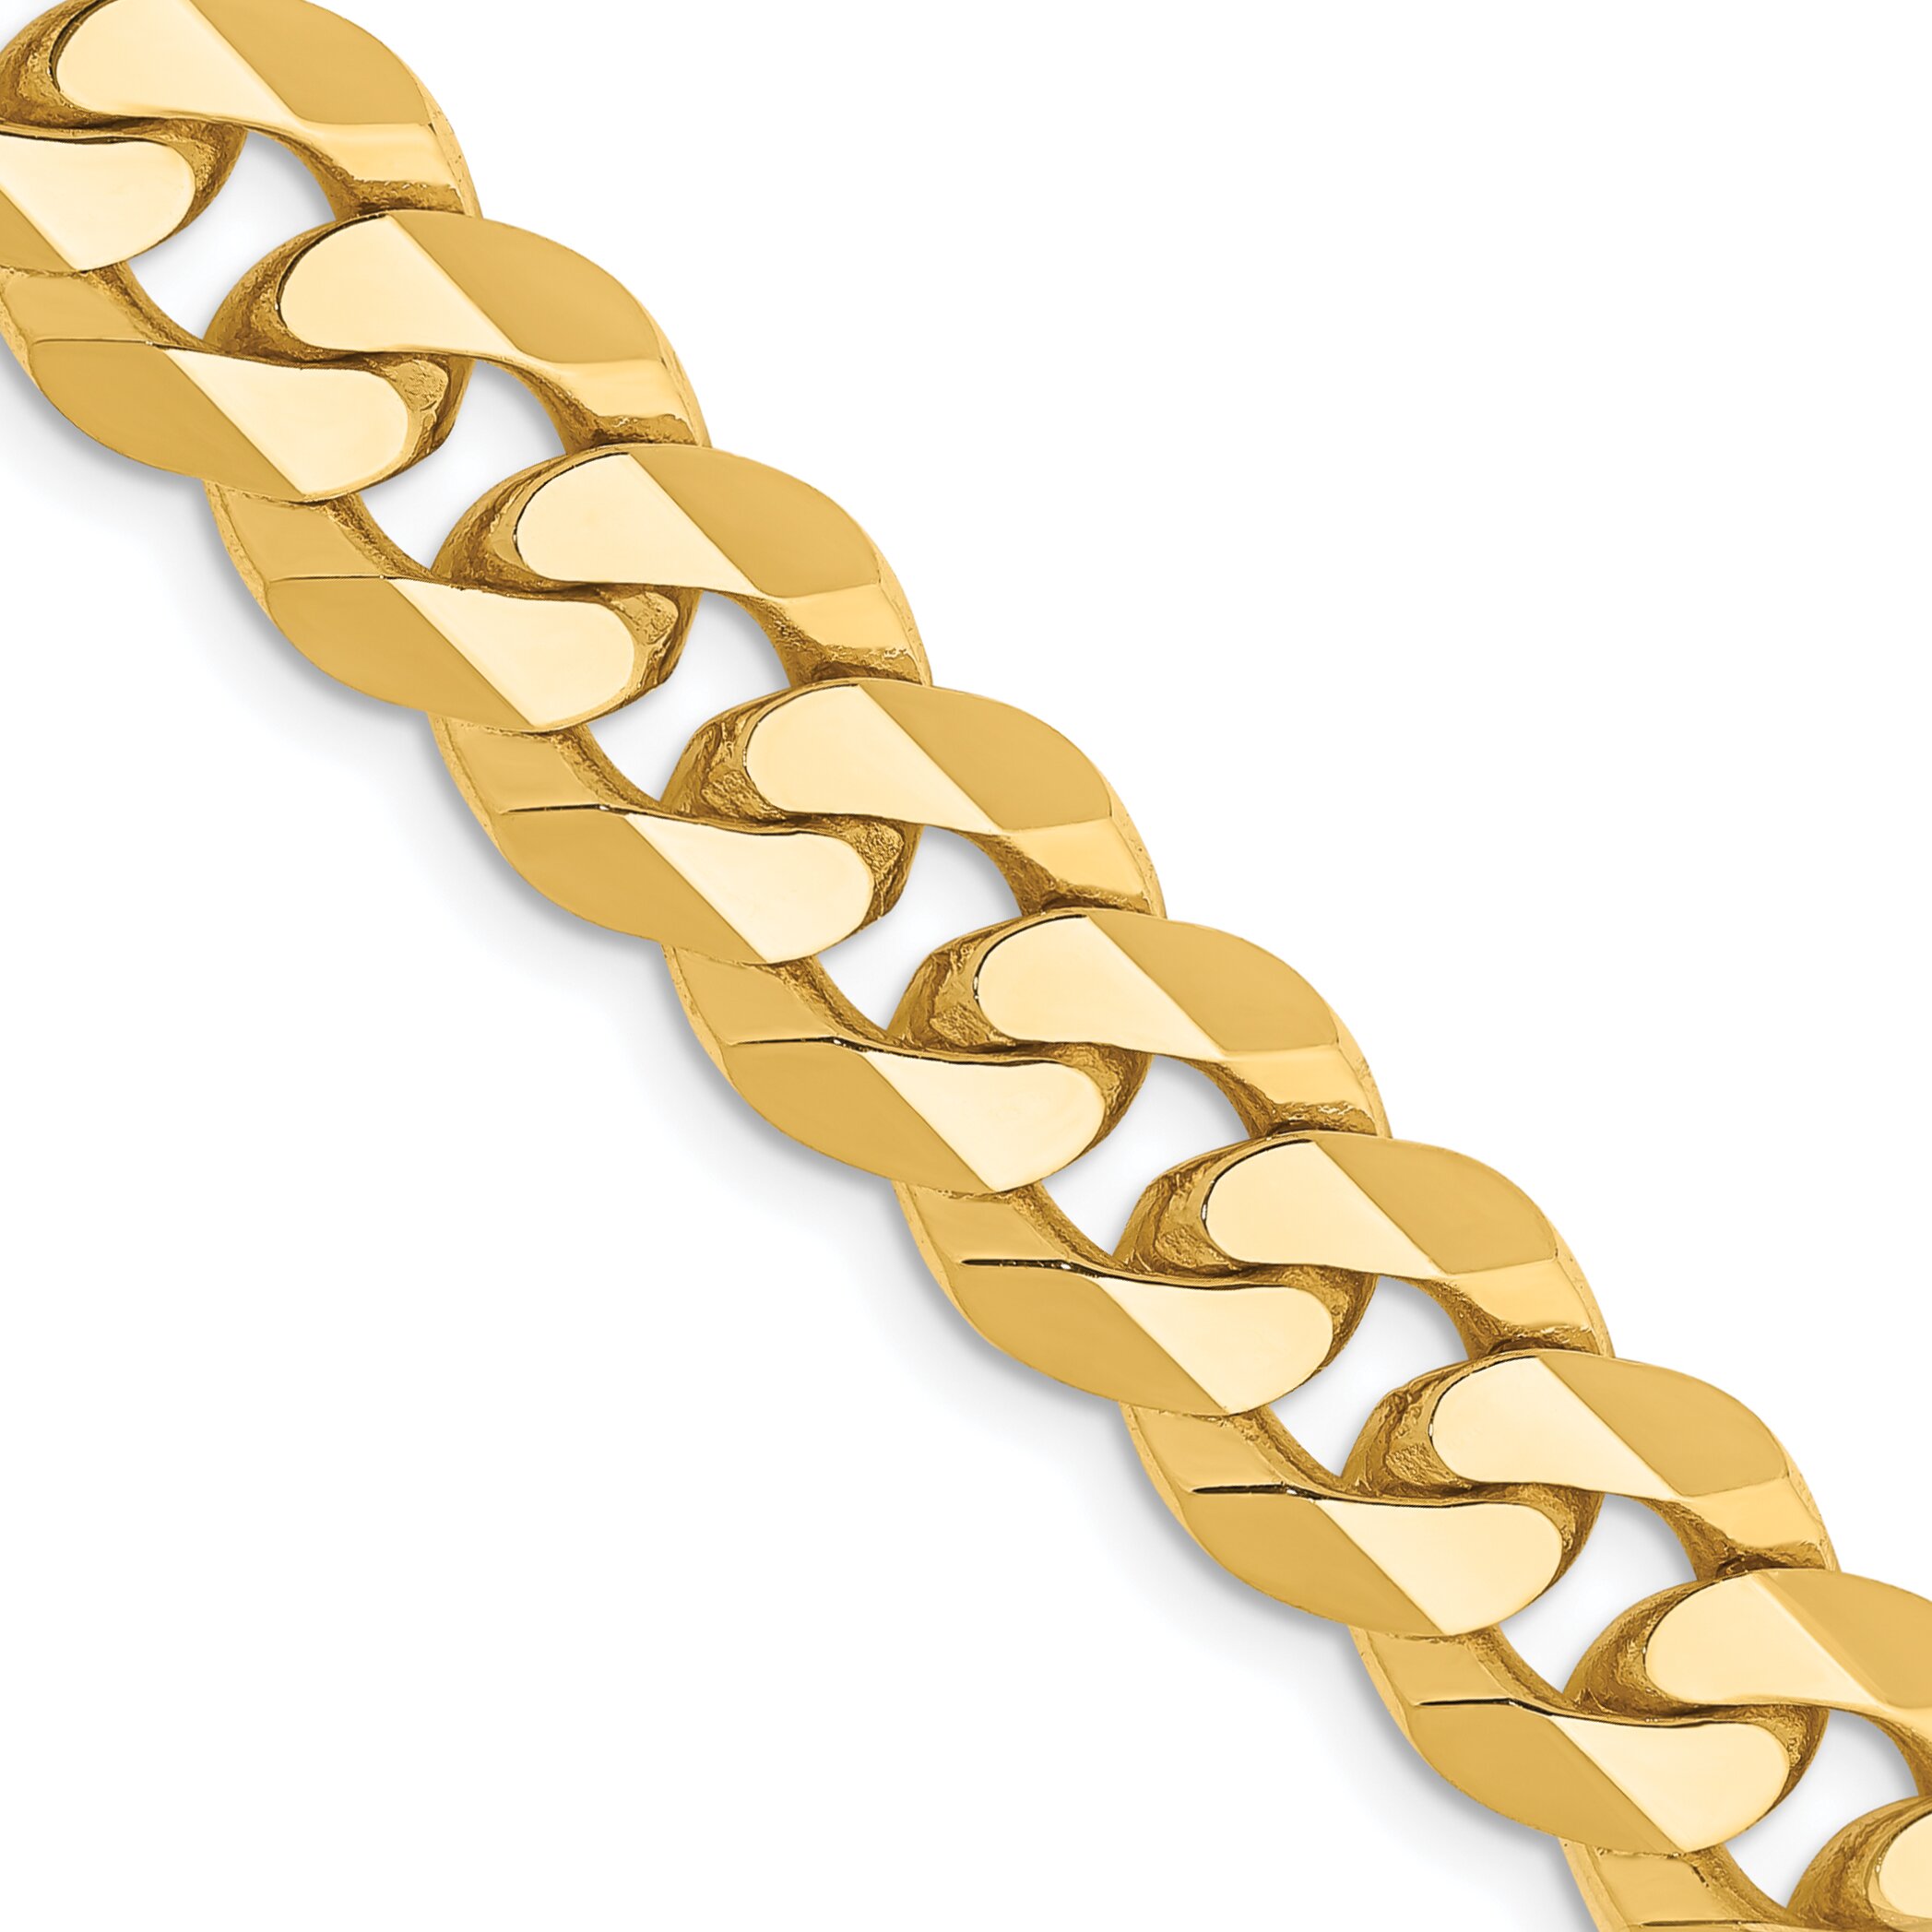 Findingking 14K Gold Beveled Curb Chain Necklace 20" 10mm